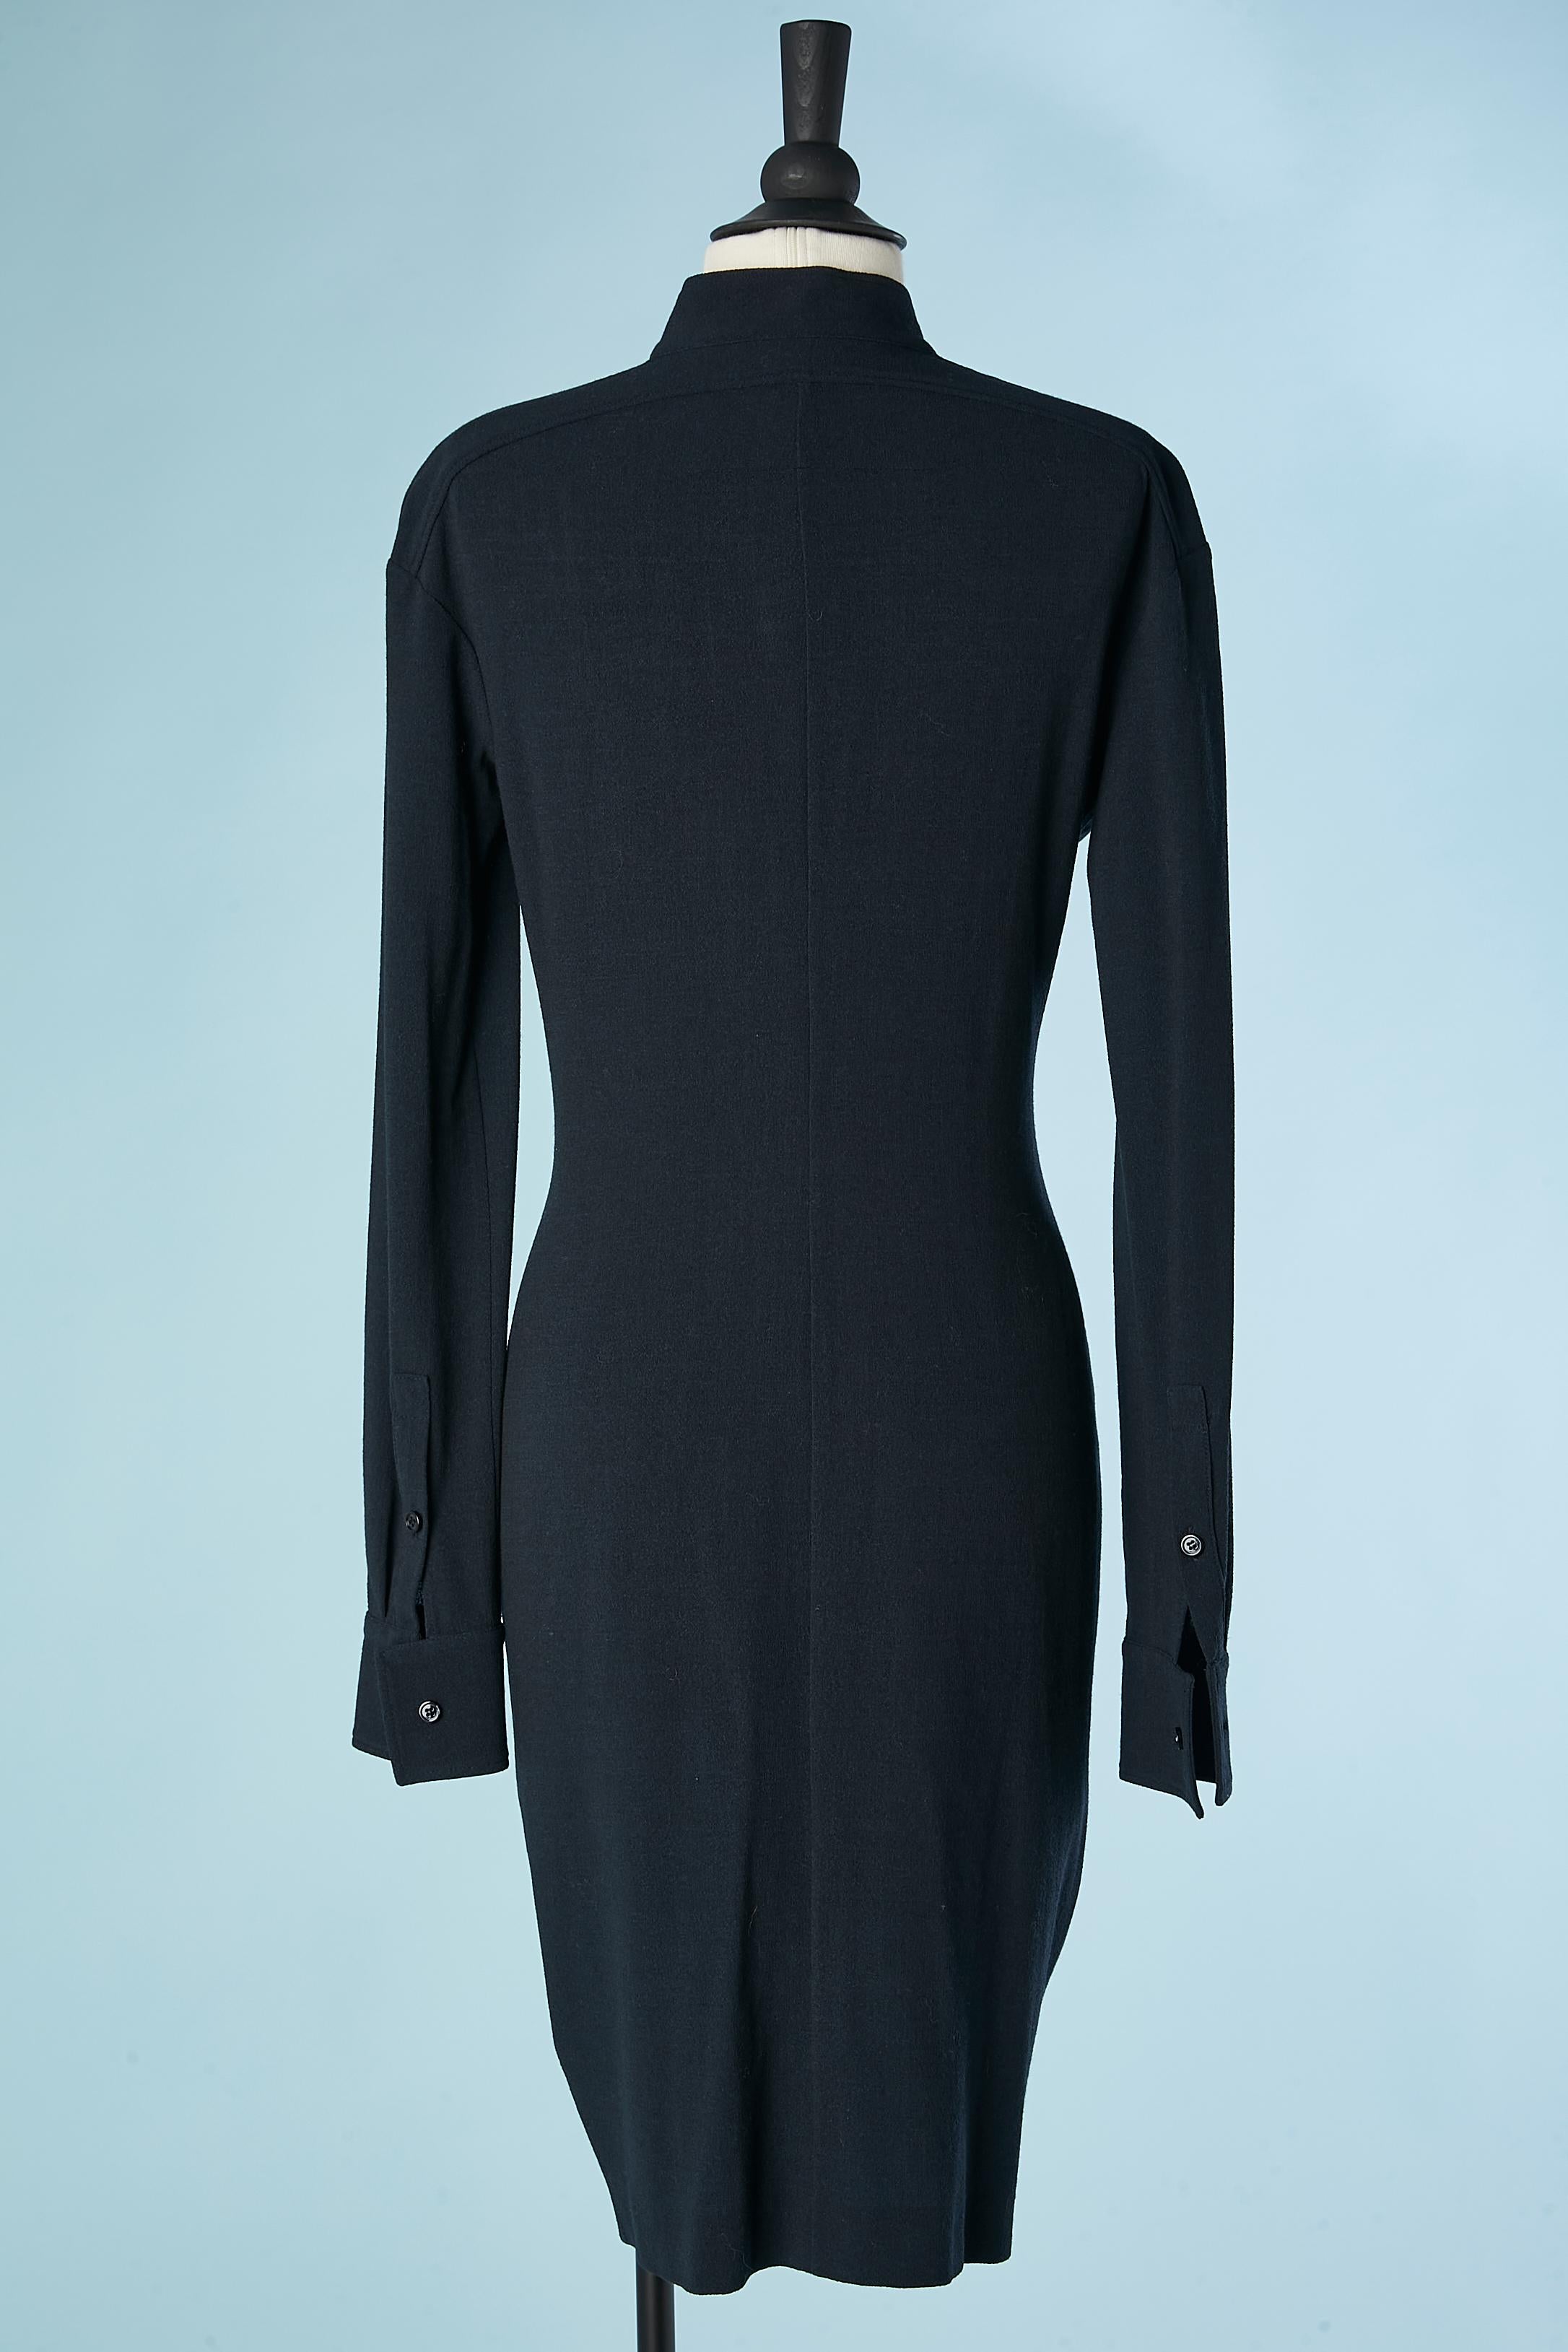 Navy blue cocktail dress in stretch wool with drape, ruffles and zip  Givenchy  1